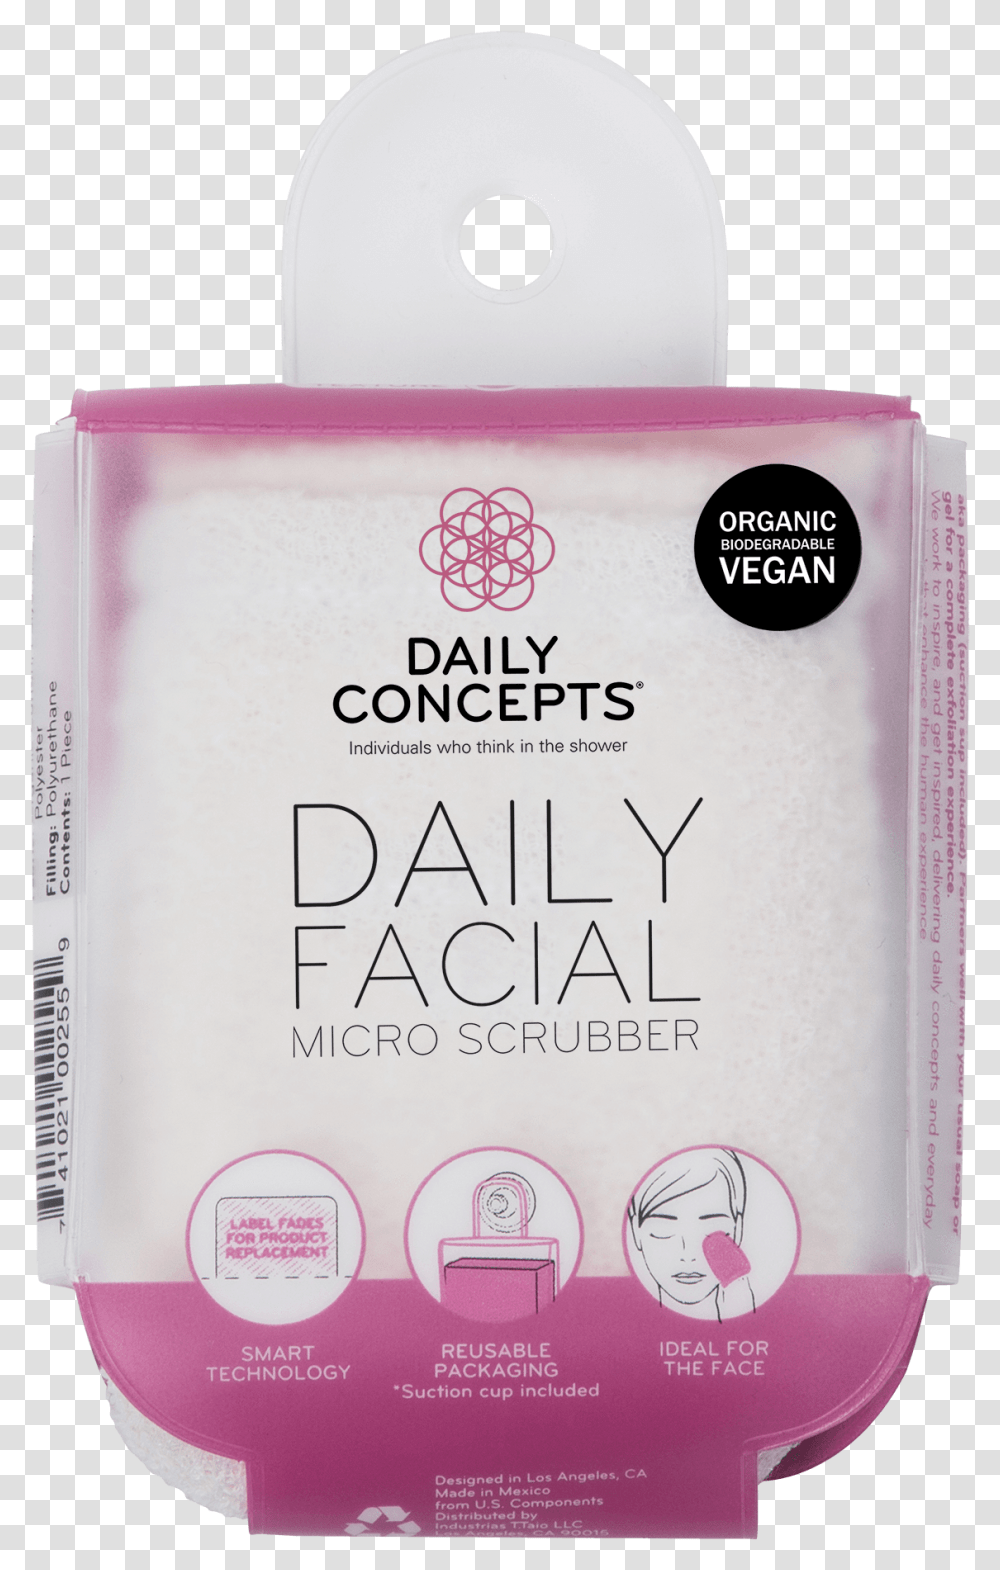 Daily Concepts Facial Micro Scrubber, Bottle, Soap, Book Transparent Png